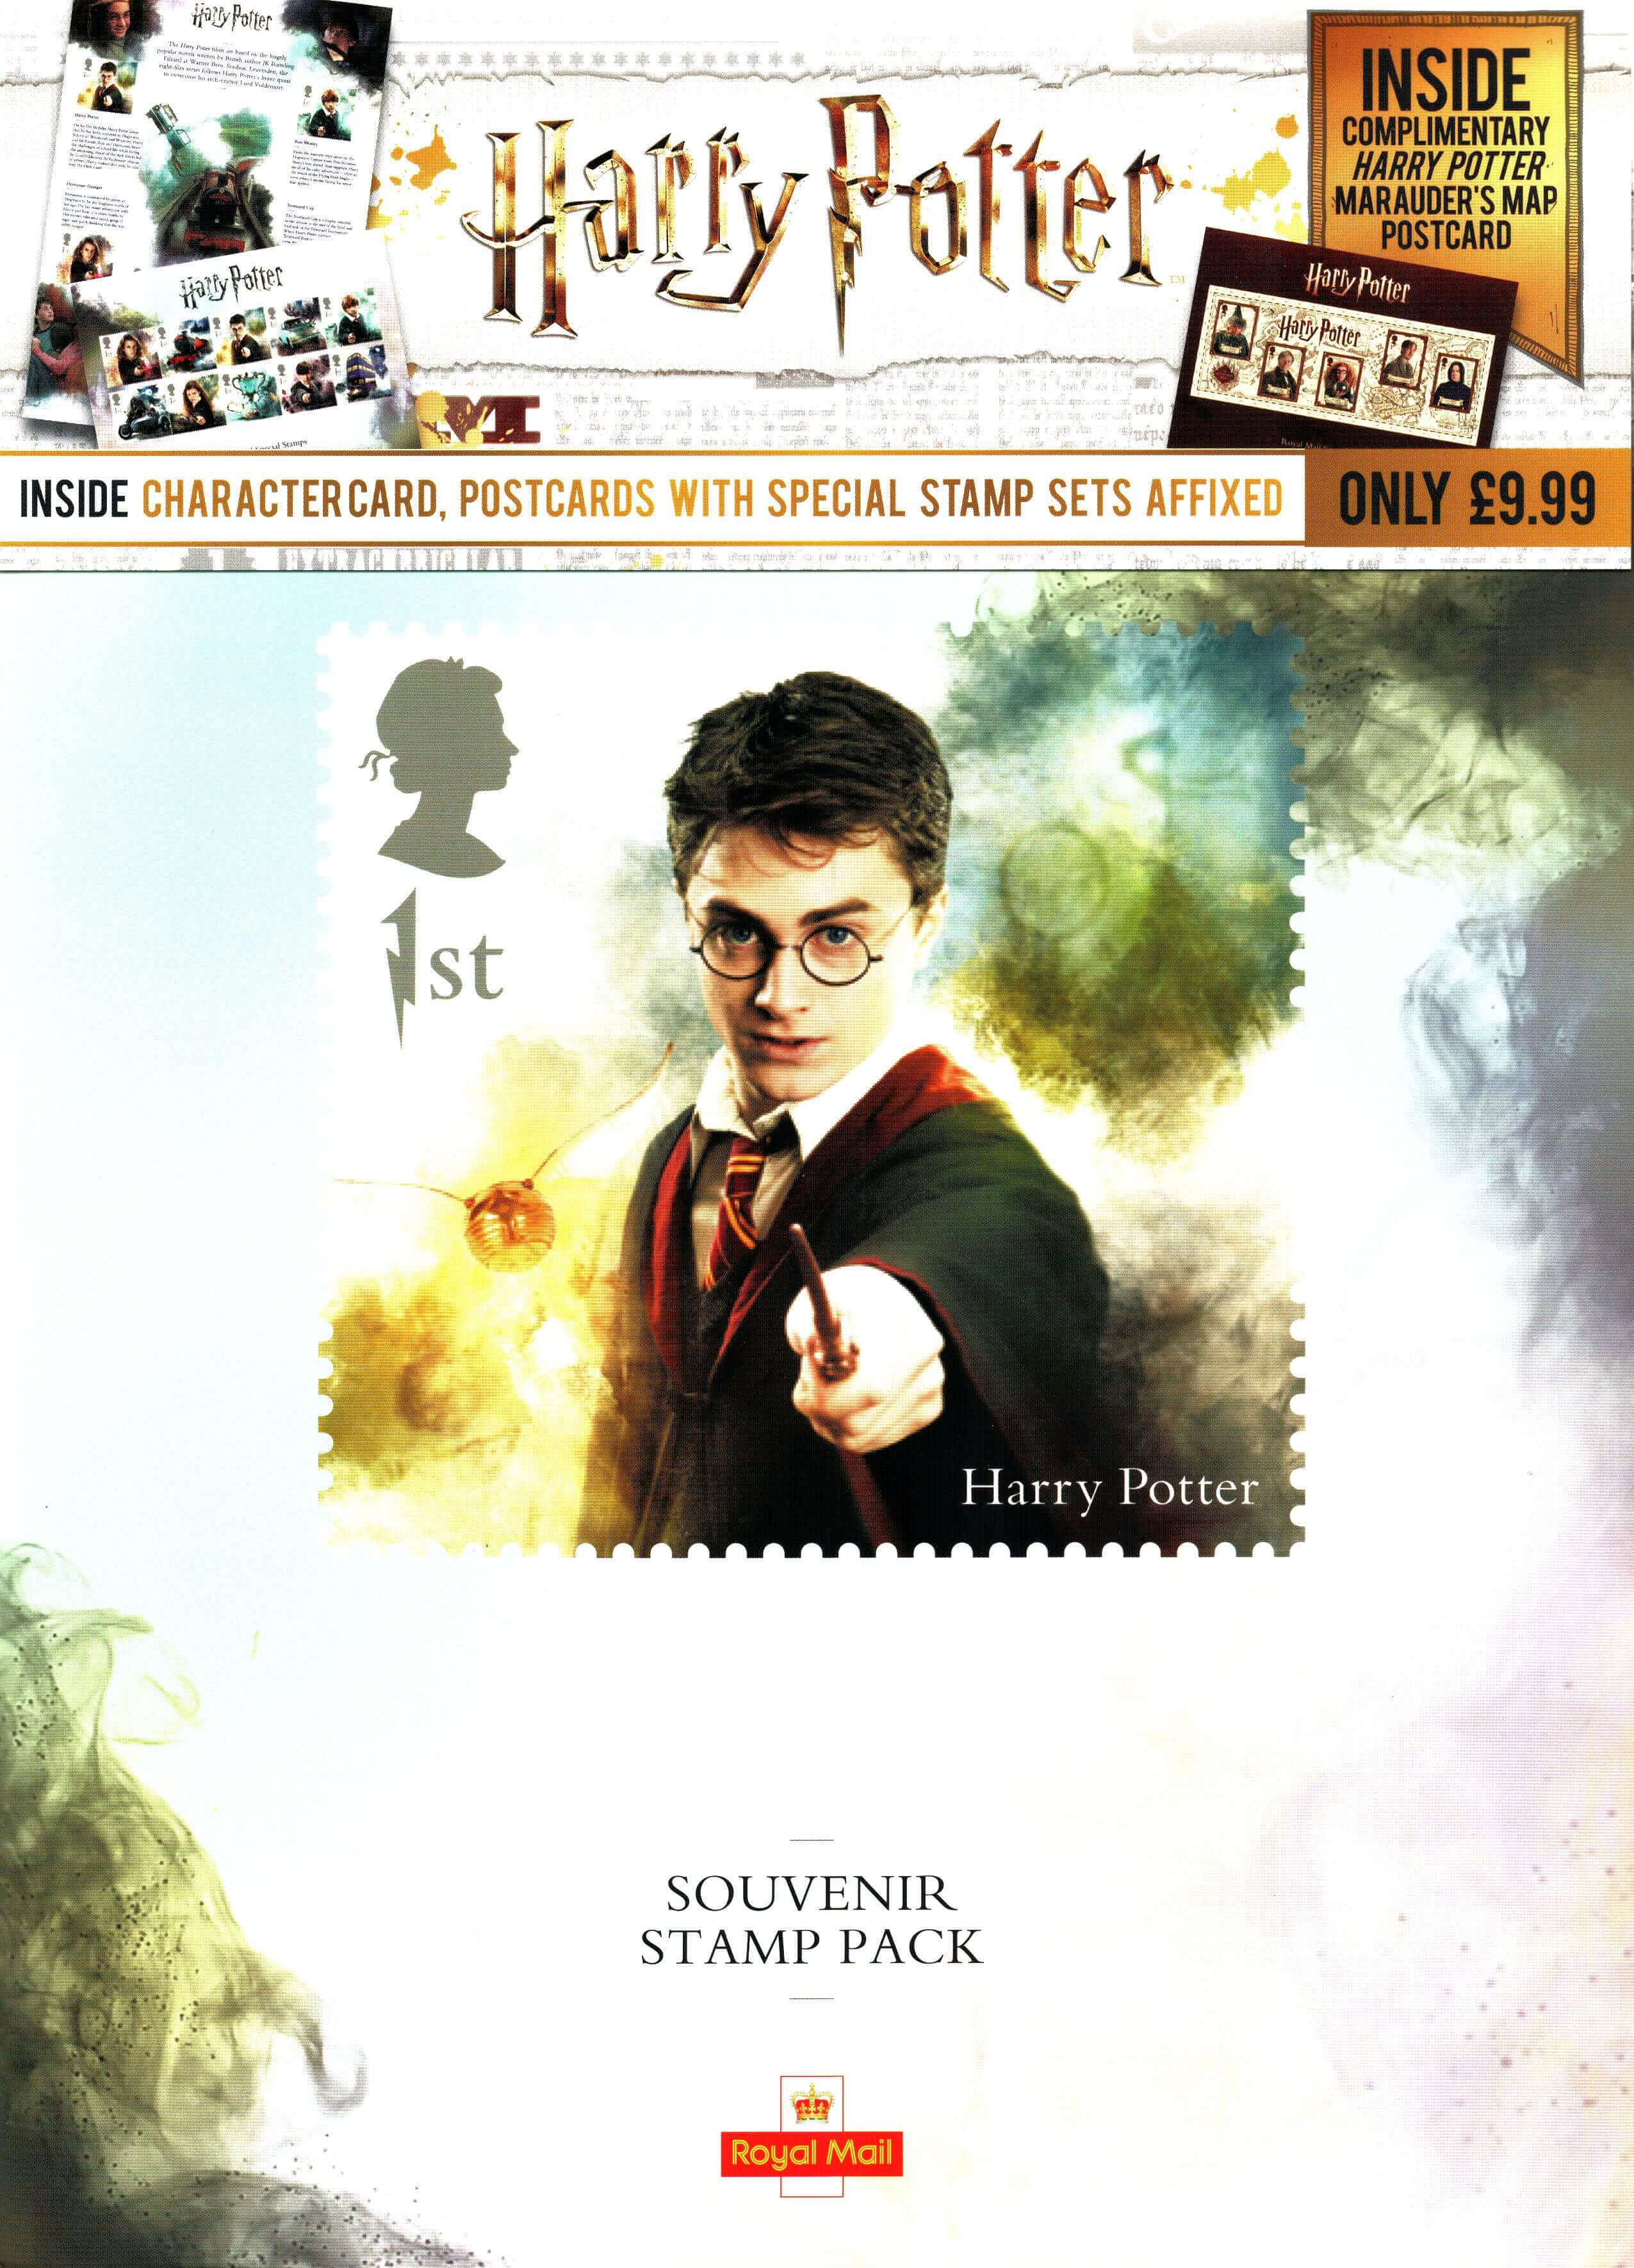 MFN068 - 2018 Harry Potter, Mint, Set of 10 Stamps, Great Britain